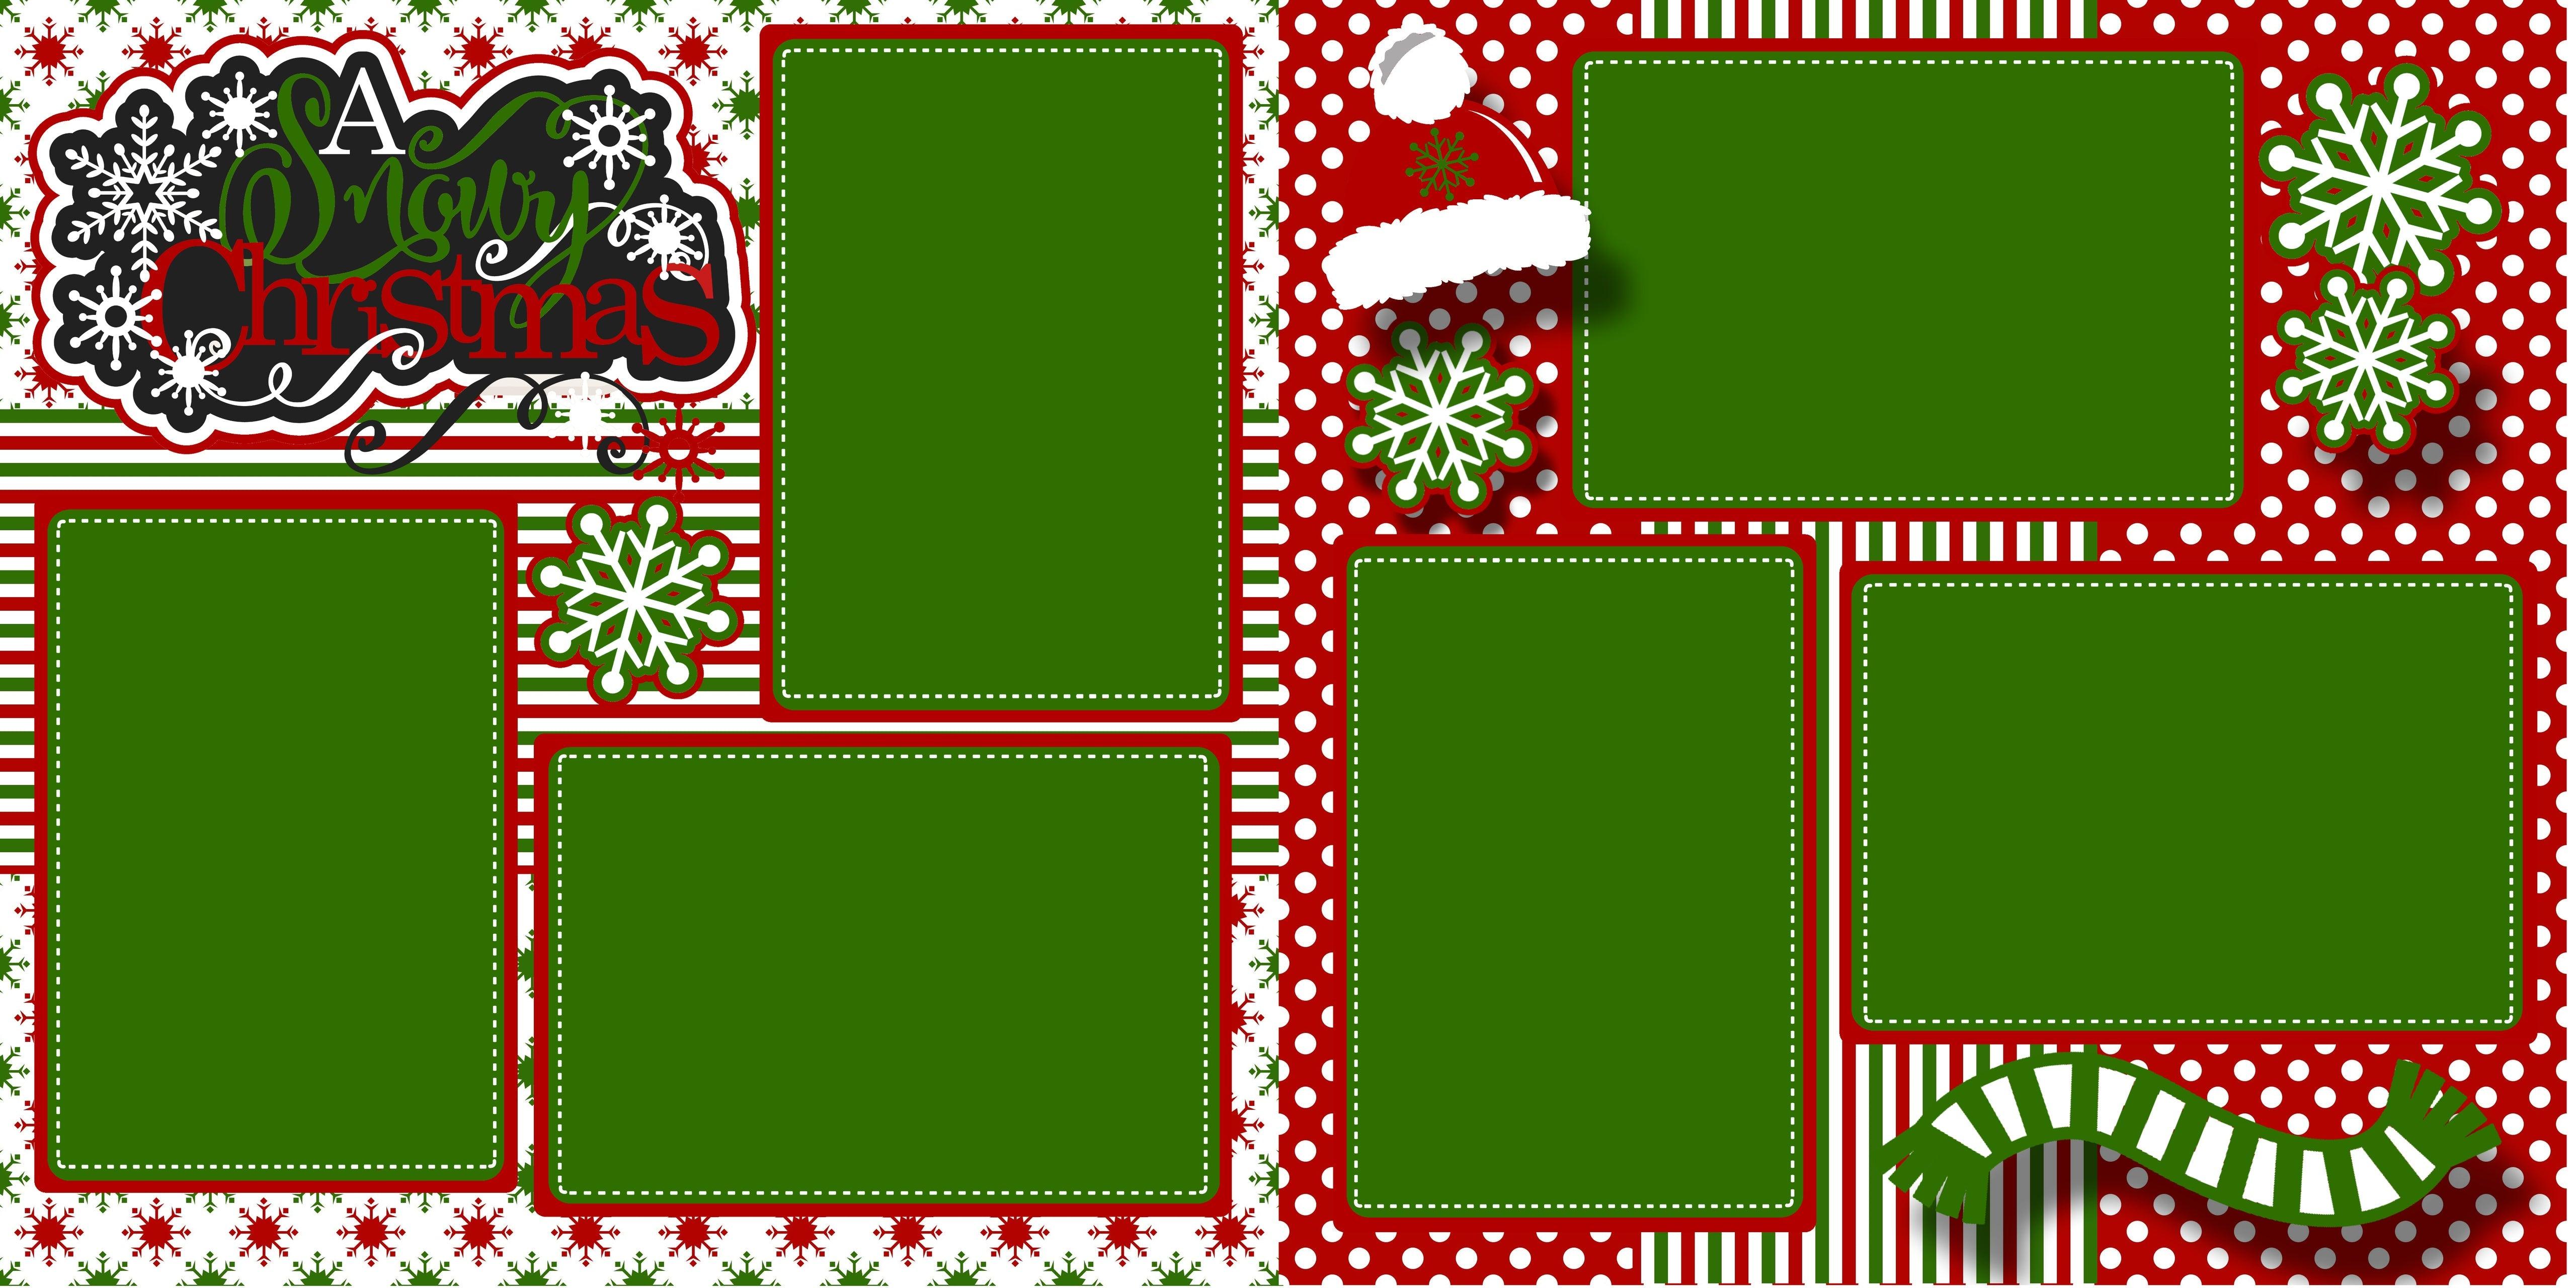 SSC Designs | A Snowy Christmas Printed Scrapbook Pages